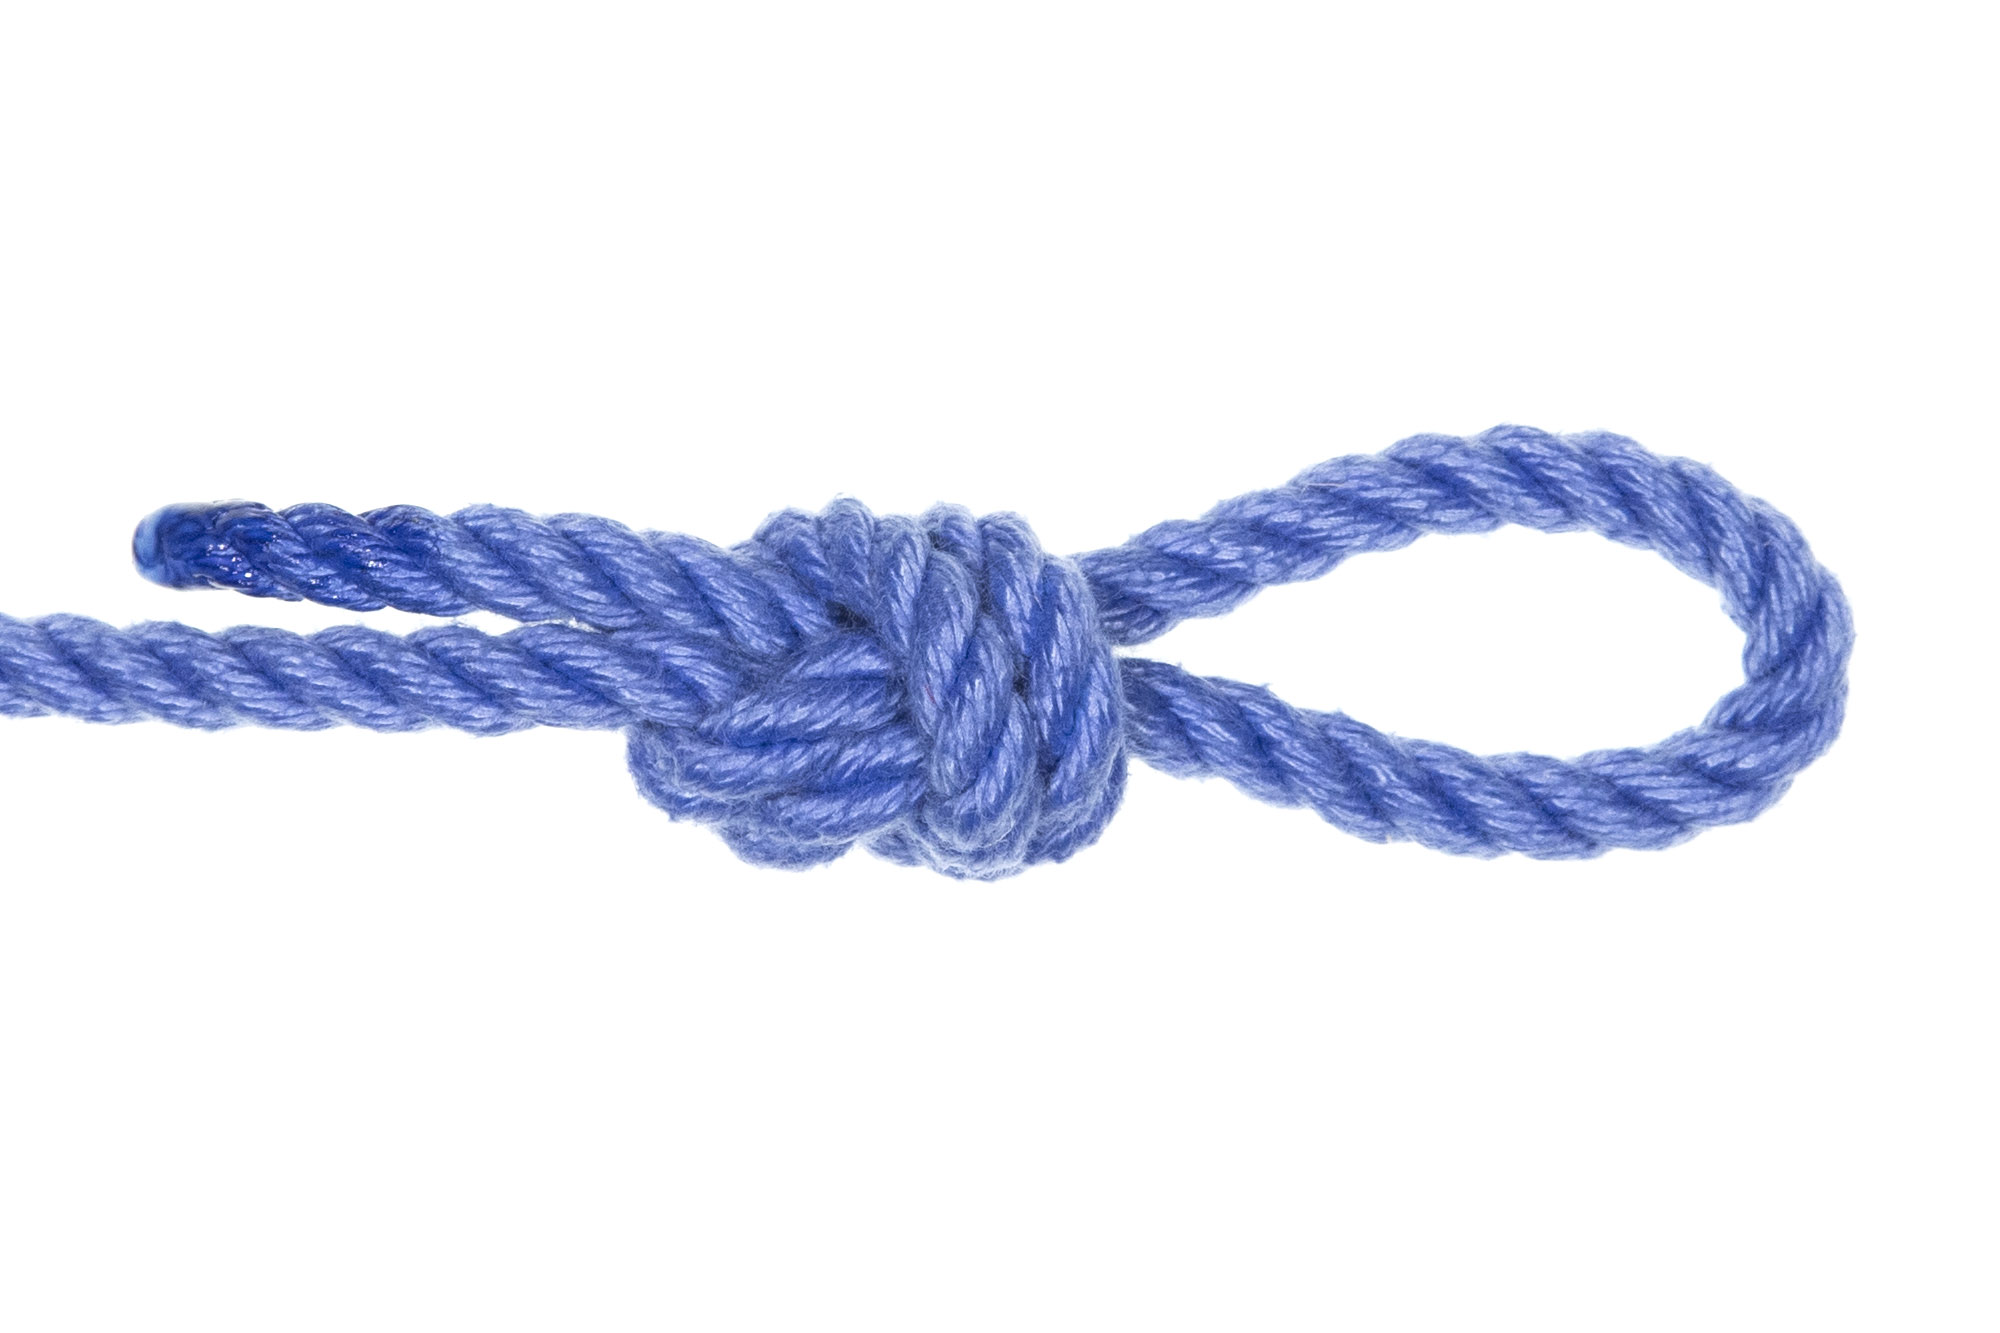 An overhand loop knot tied in blue rope. The rope enters from the left and is tied into a compact knot with a loop extending out to the right.